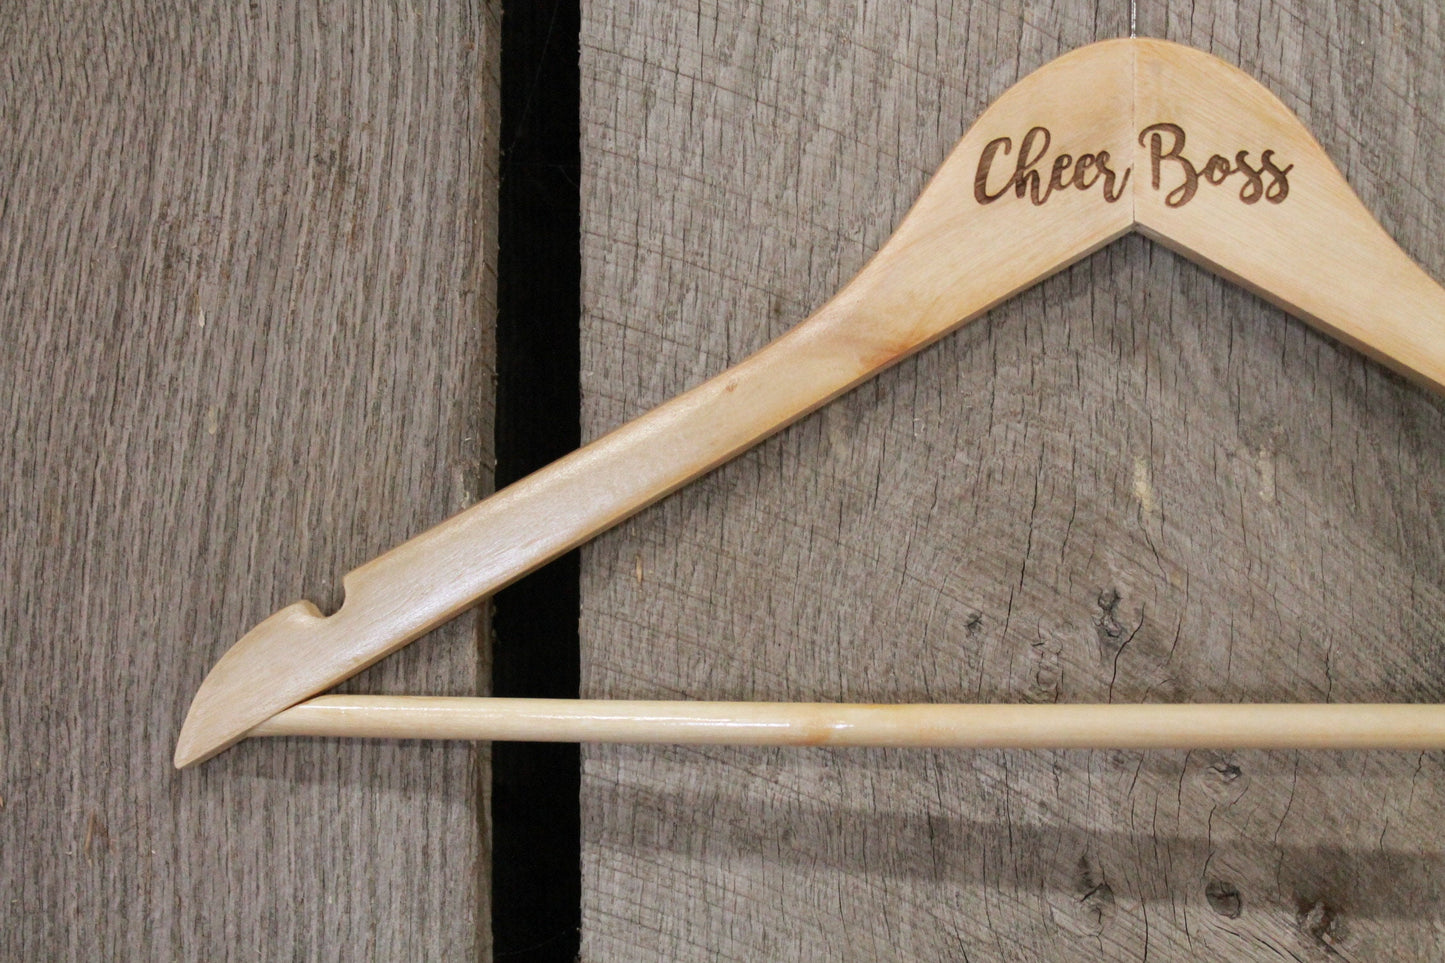 Cheer Boss Cheer Leading Cheer Leader Costume Uniform Clothes Hanger Engraved Hard Wood Sturdy